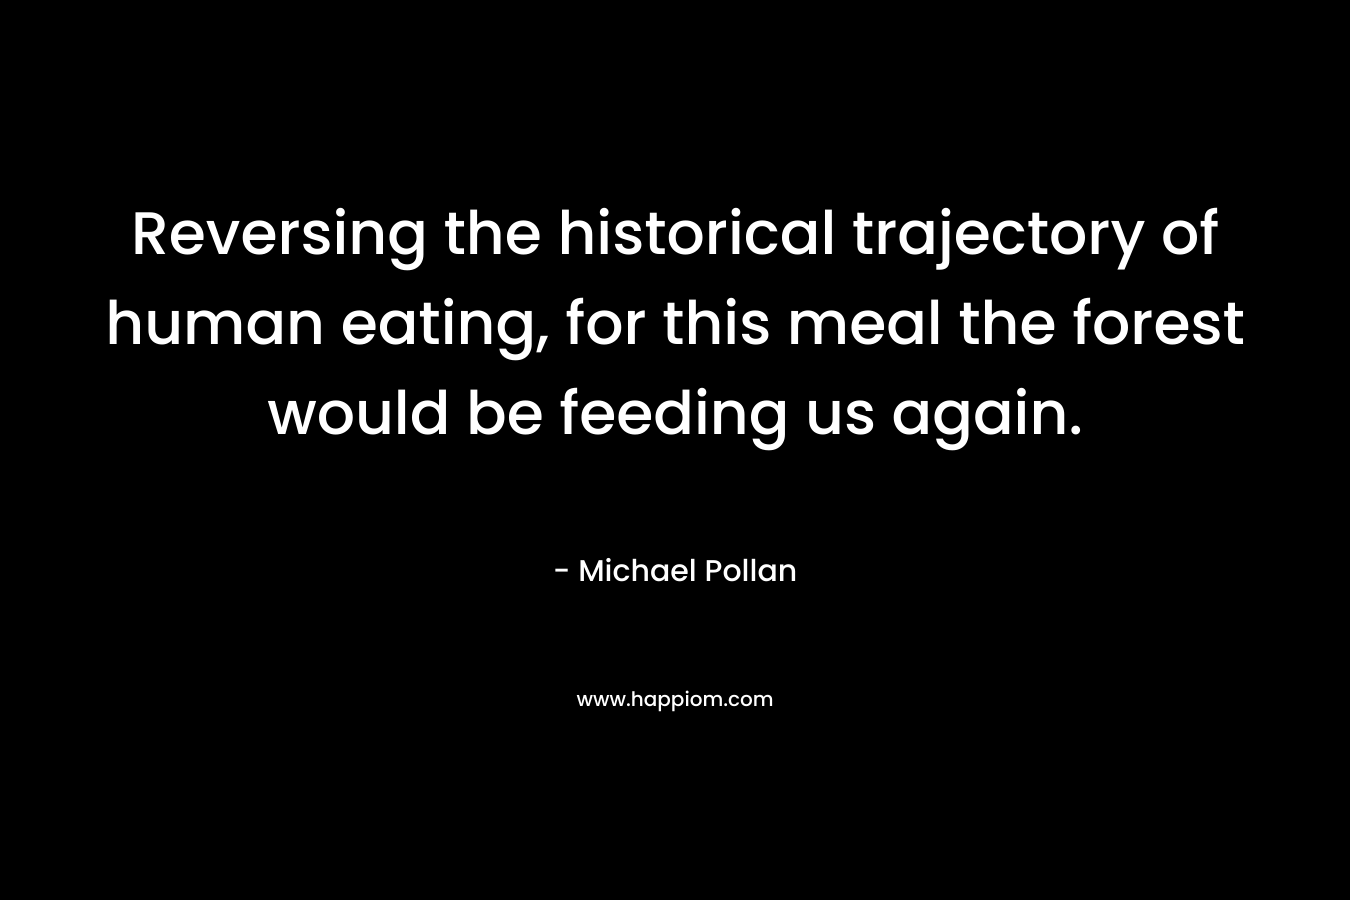 Reversing the historical trajectory of human eating, for this meal the forest would be feeding us again.